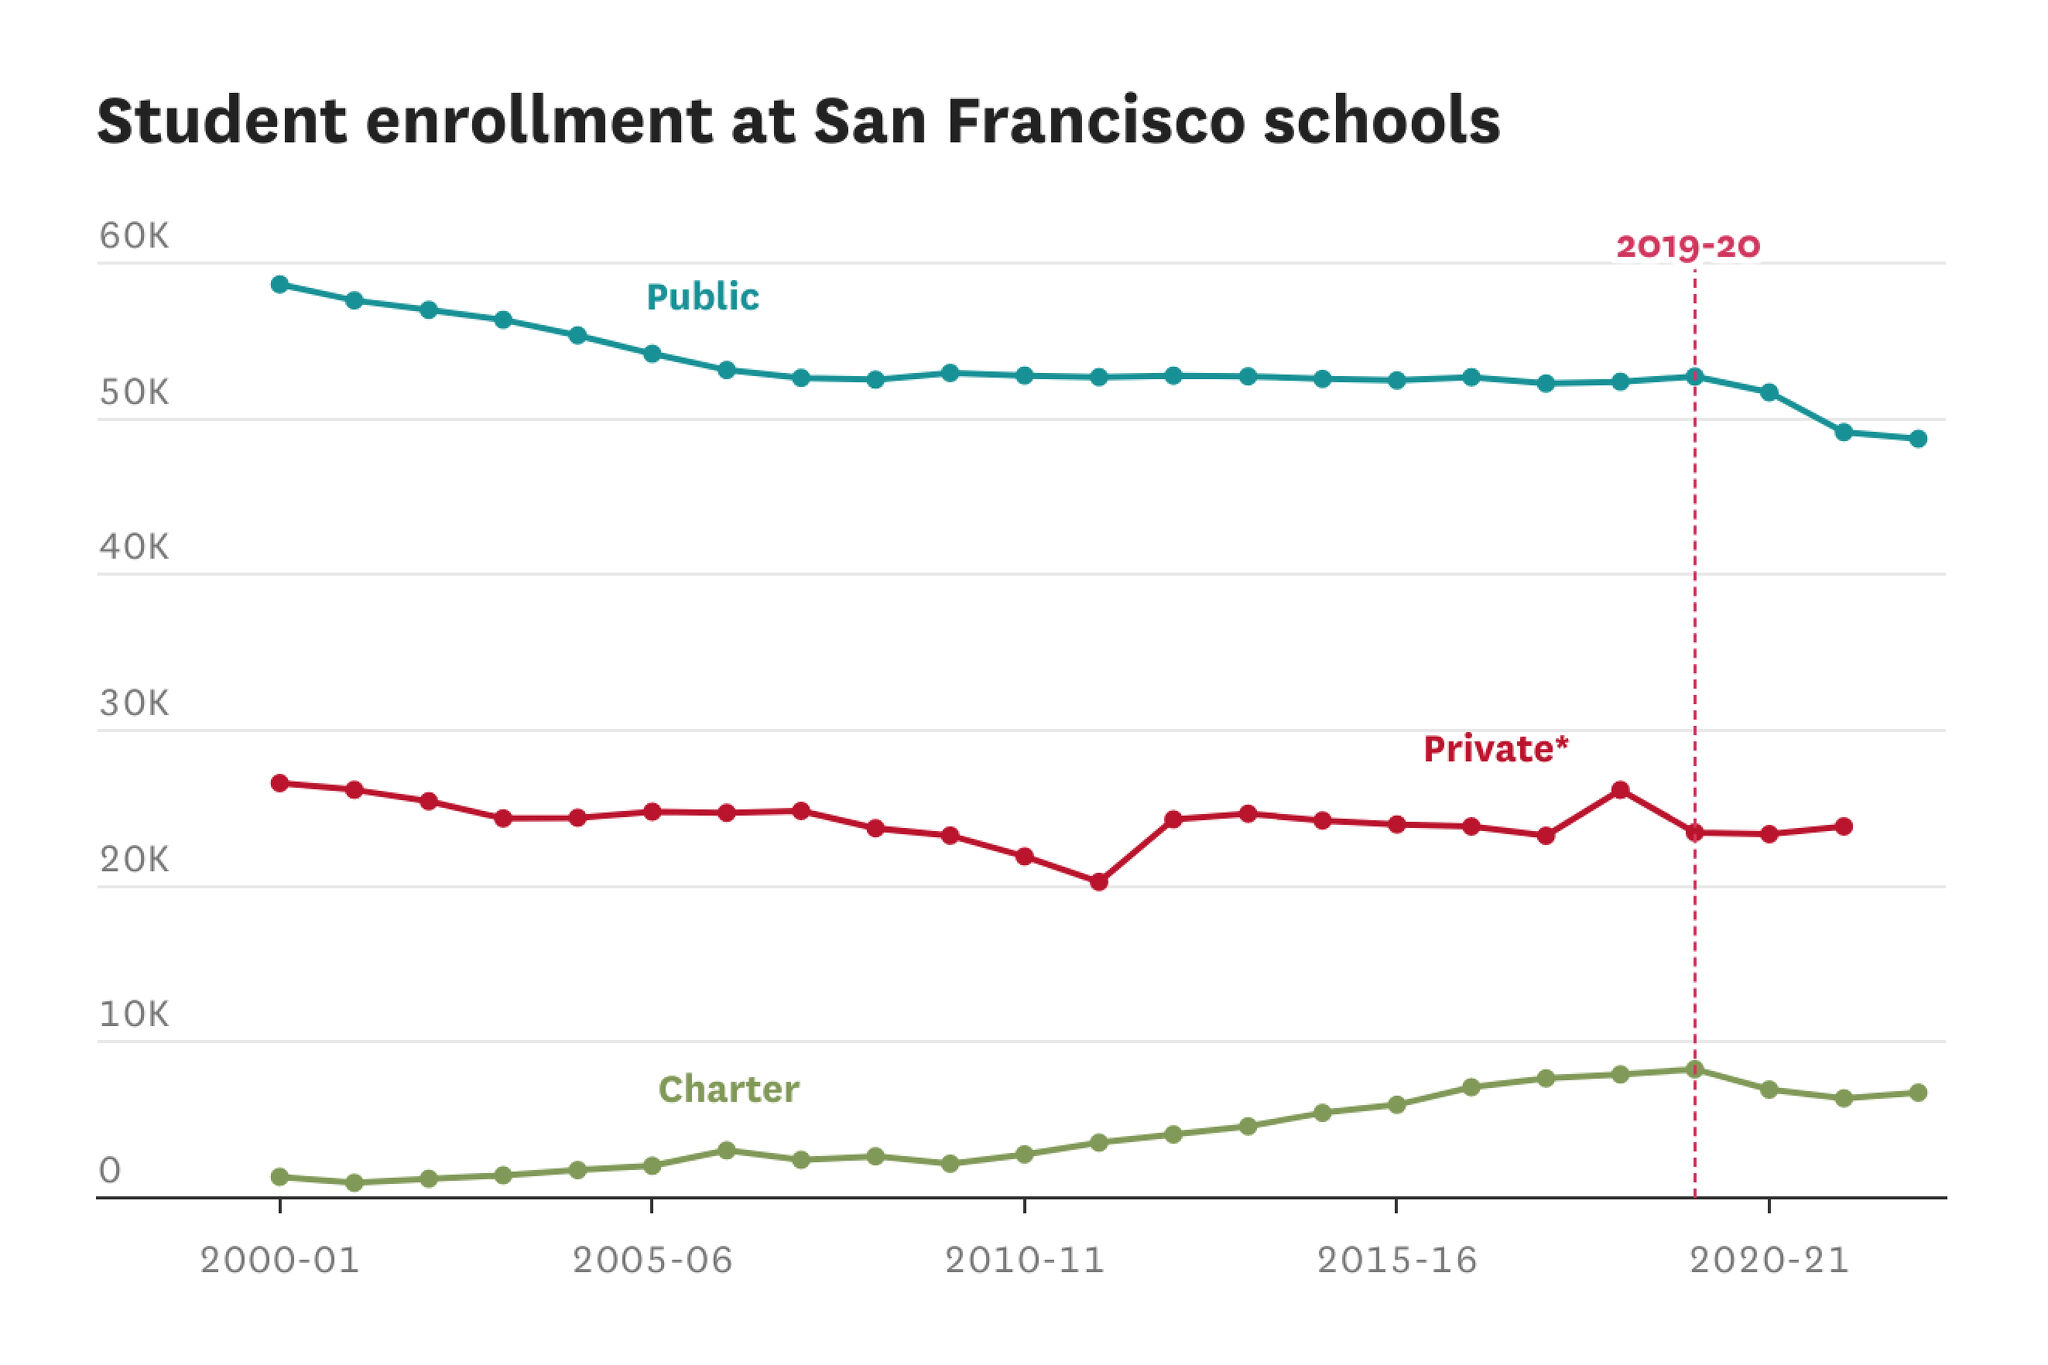 Here’s how San Francisco’s public school enrollment compares to other